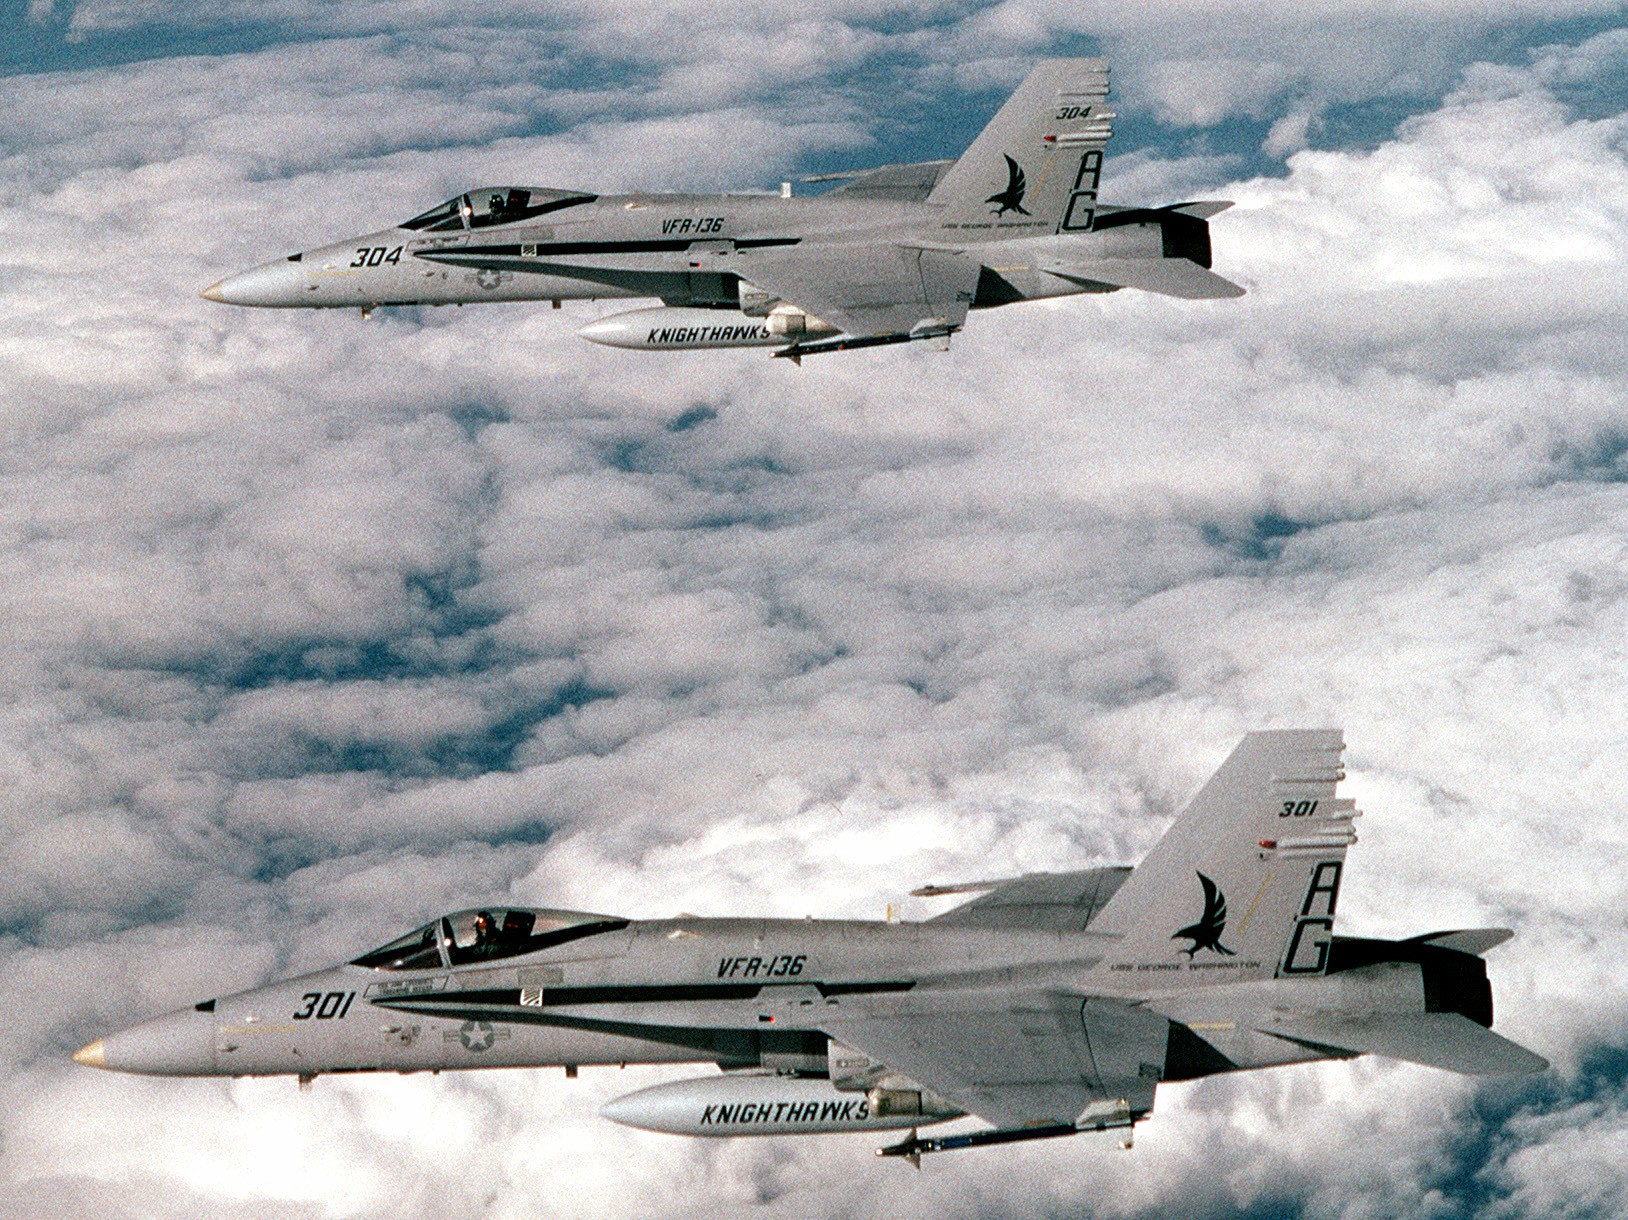 vfa-136 knighthawks strike fighter squadron f/a-18c hornet 1993 101 carrier air wing cvw-7